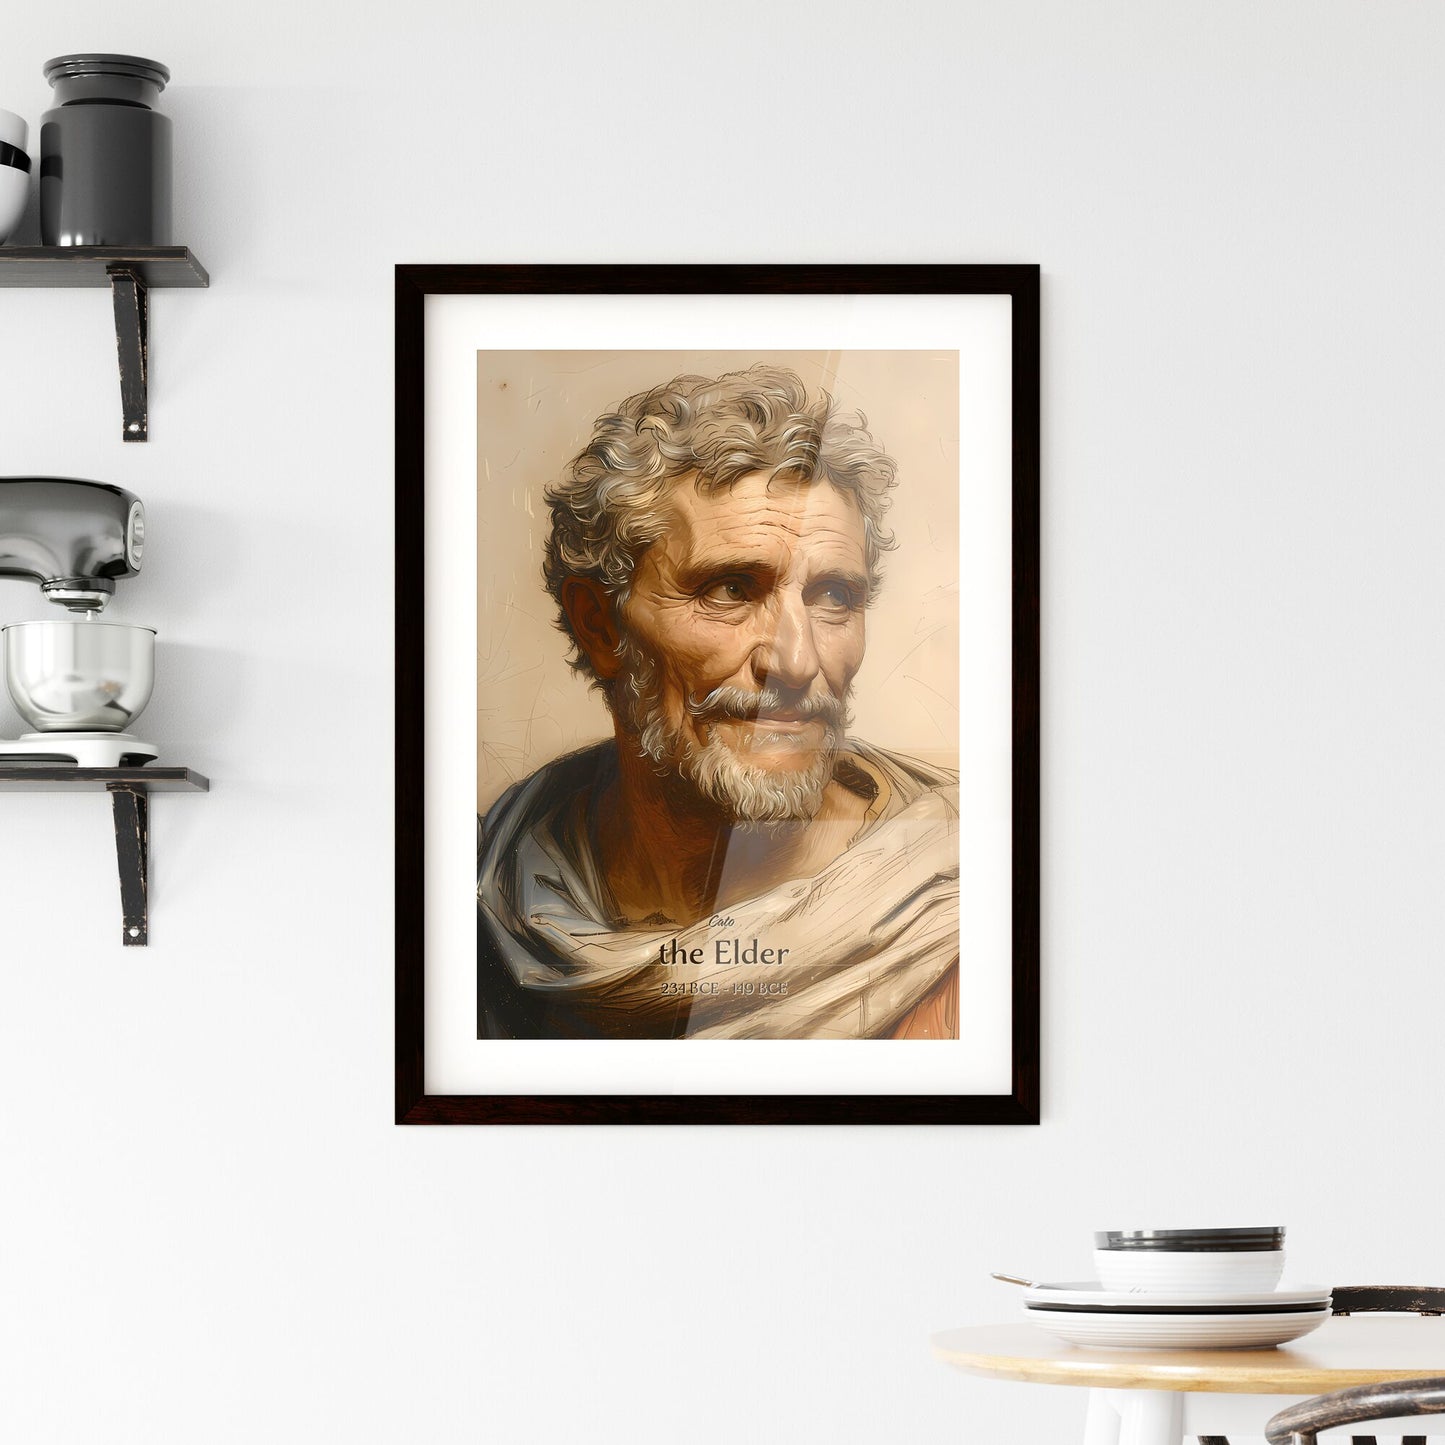 Cato, the Elder, 234 BCE - 149 BCE, A Poster of a man with a beard and mustache Default Title